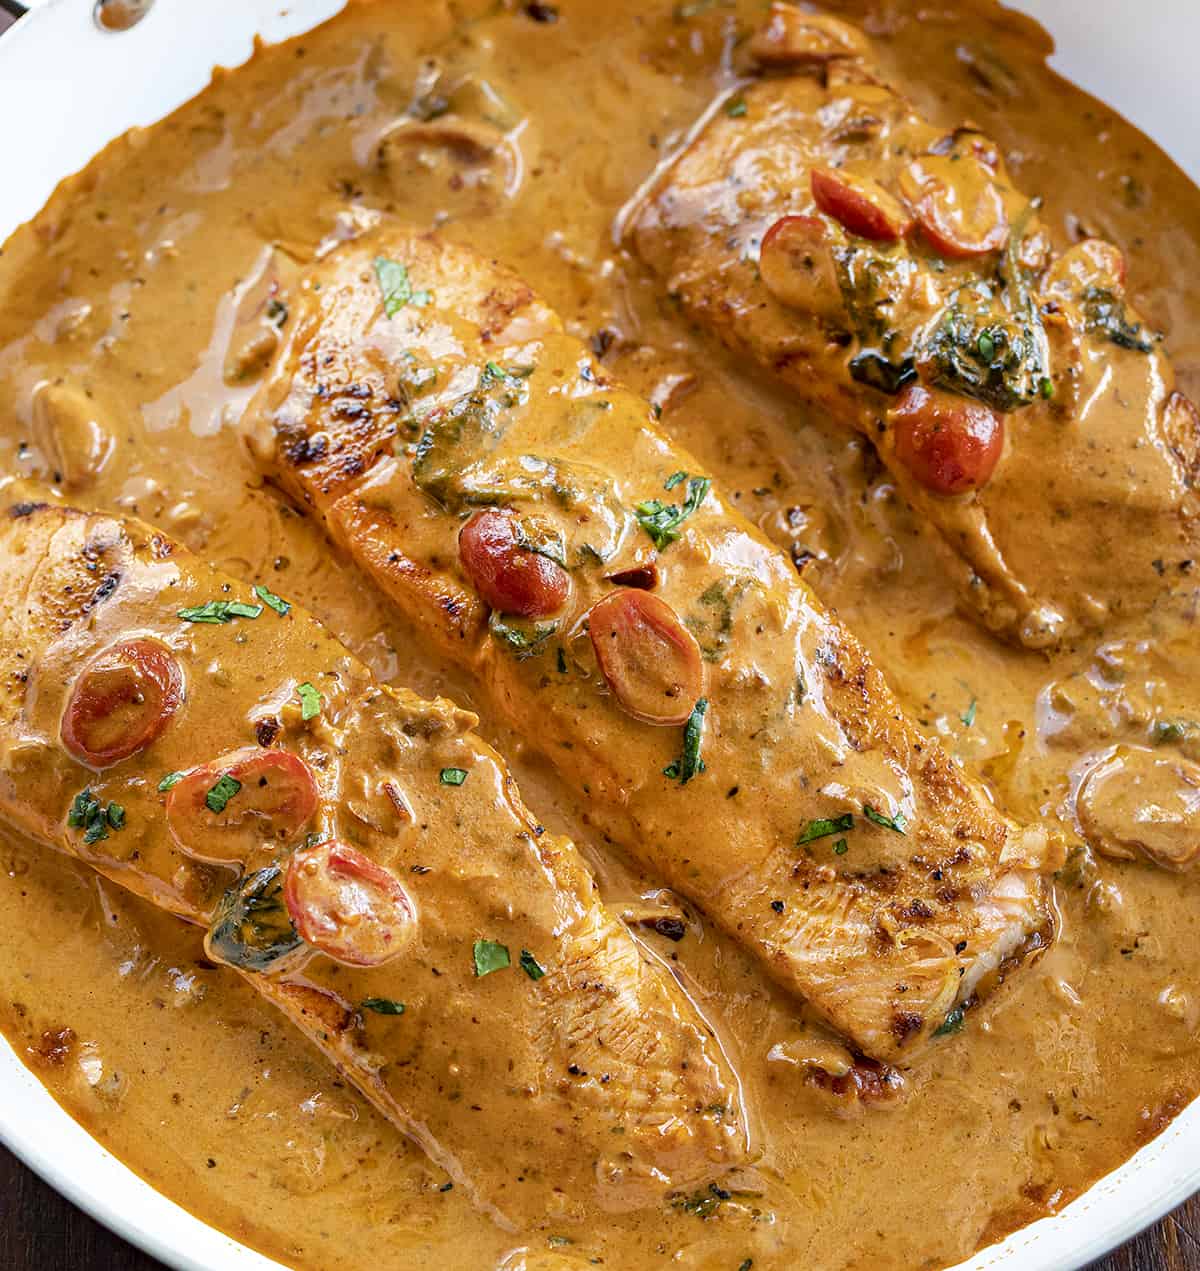 Pan of Creamy Tuscan Salmon. Salmon Recipes, Dinner, Supper, How to Cook Salmon, Comfort Food, dinner recipes, salmon tuscan, i am homesteader, iamhomesteader.